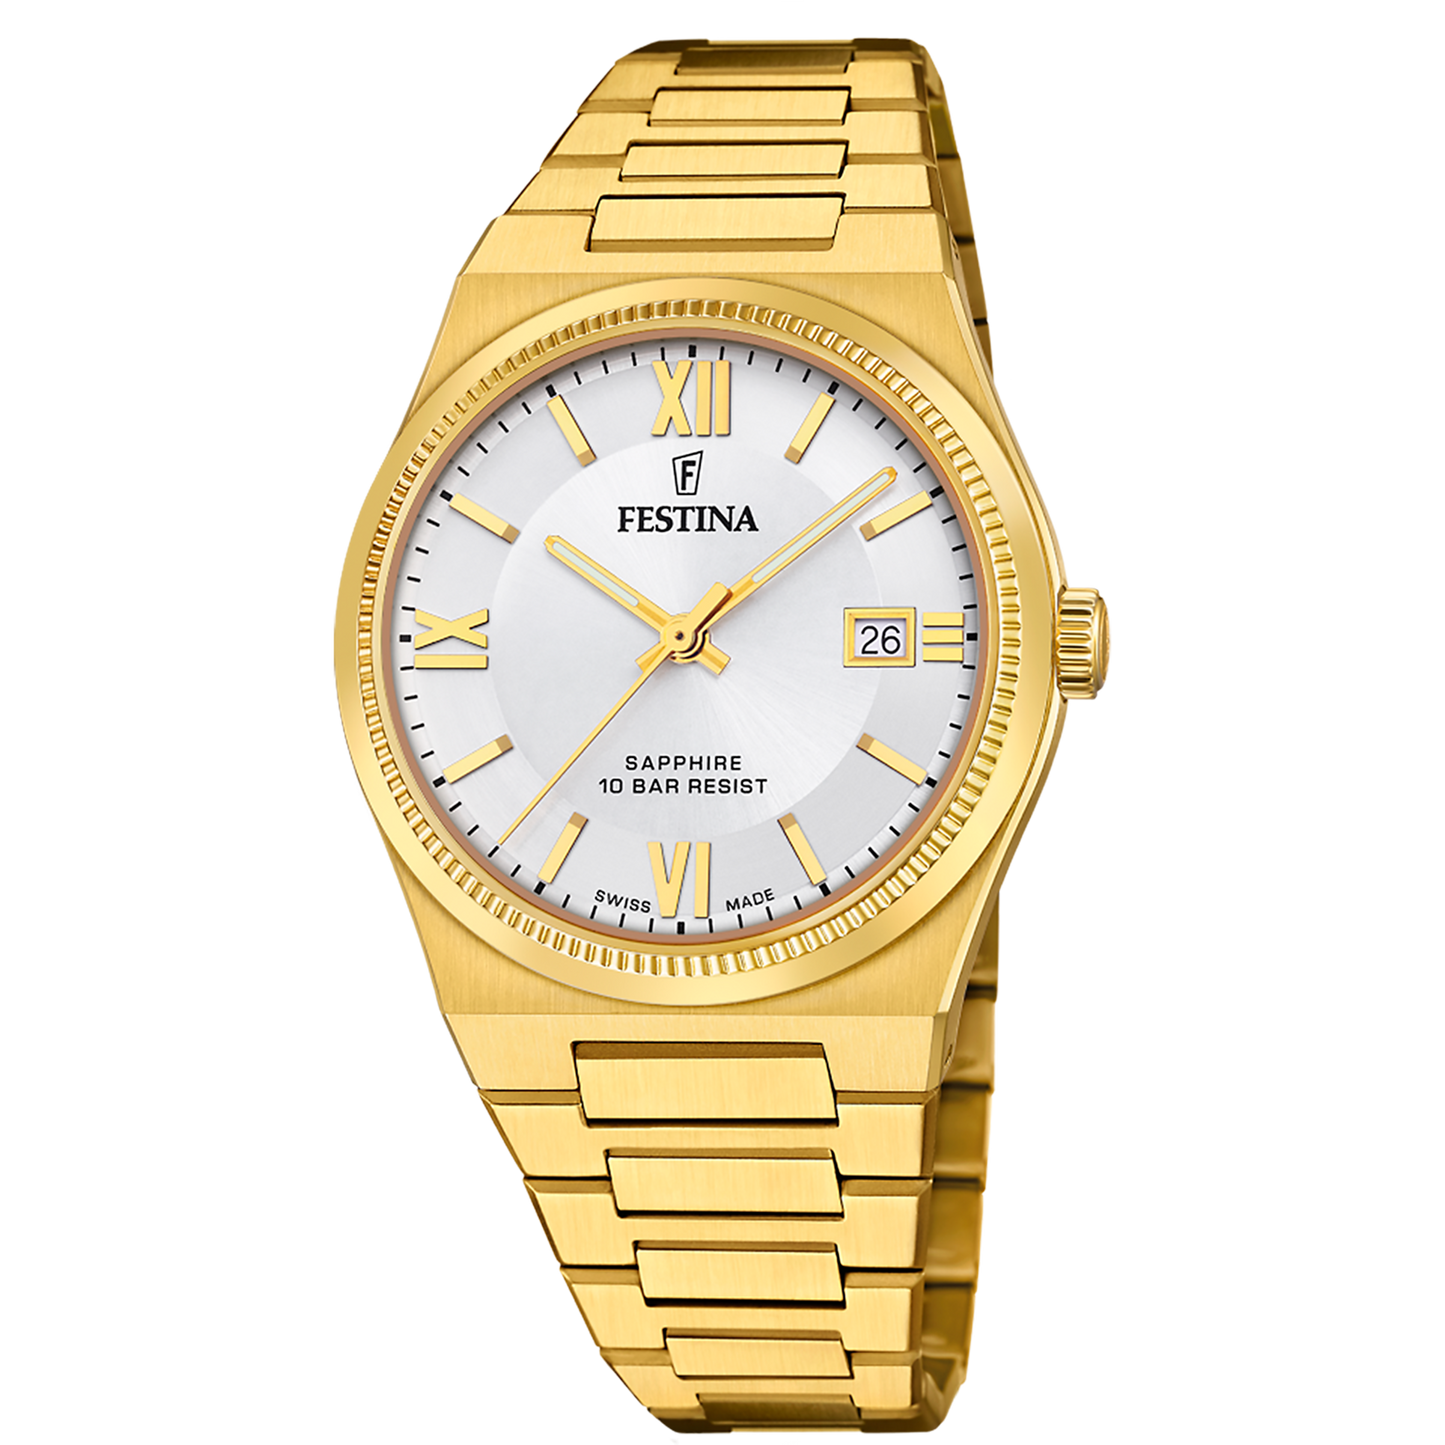 Festina Swiss Made F20038-1 - Analog - Strap Material Stainless Steel I Festina Watches USA